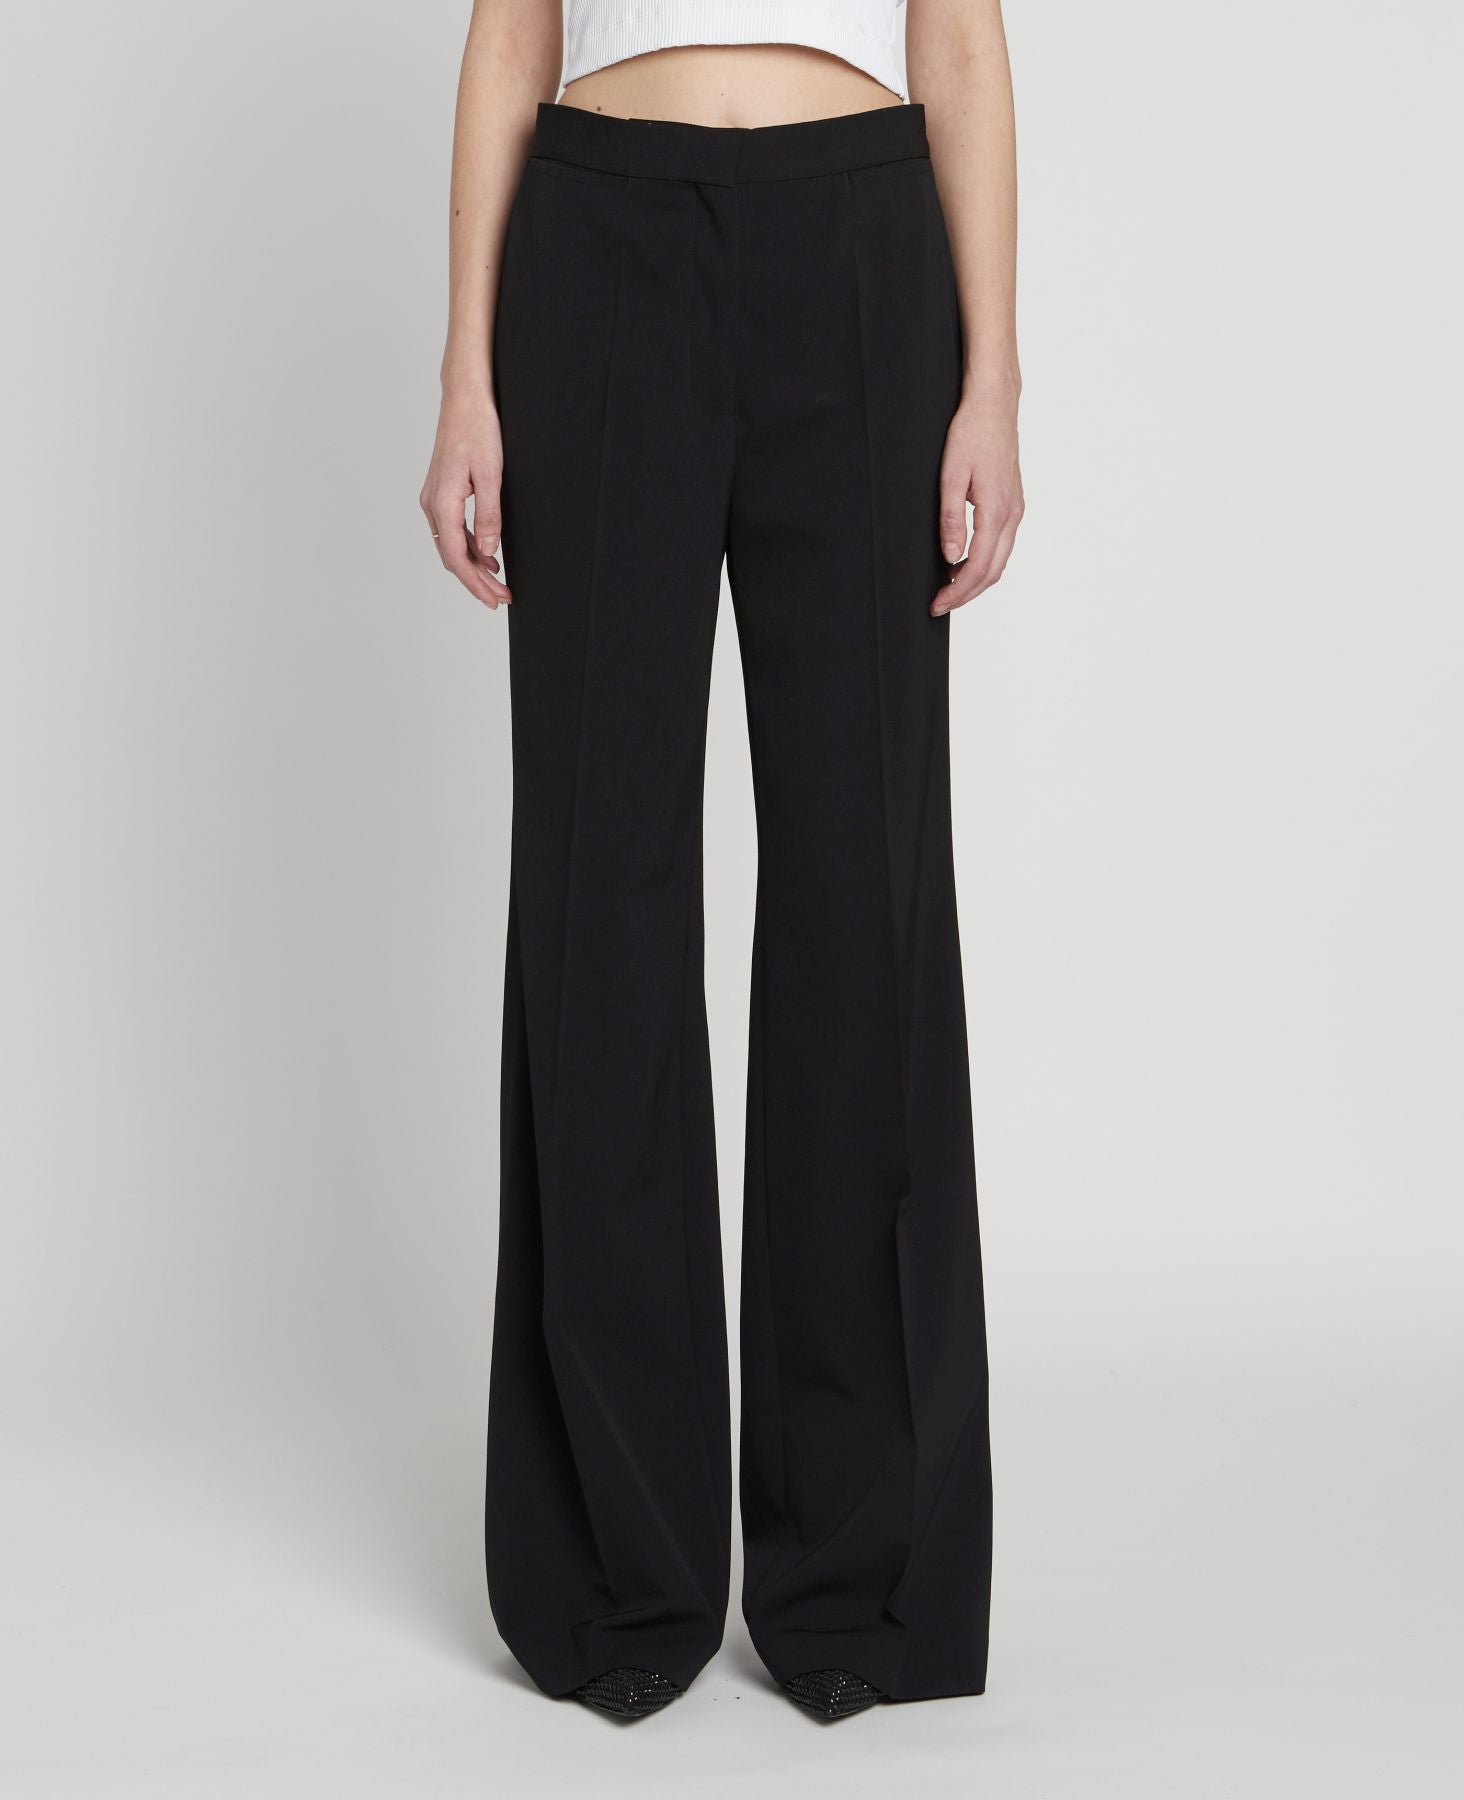 Iconic Flared Trousers, black